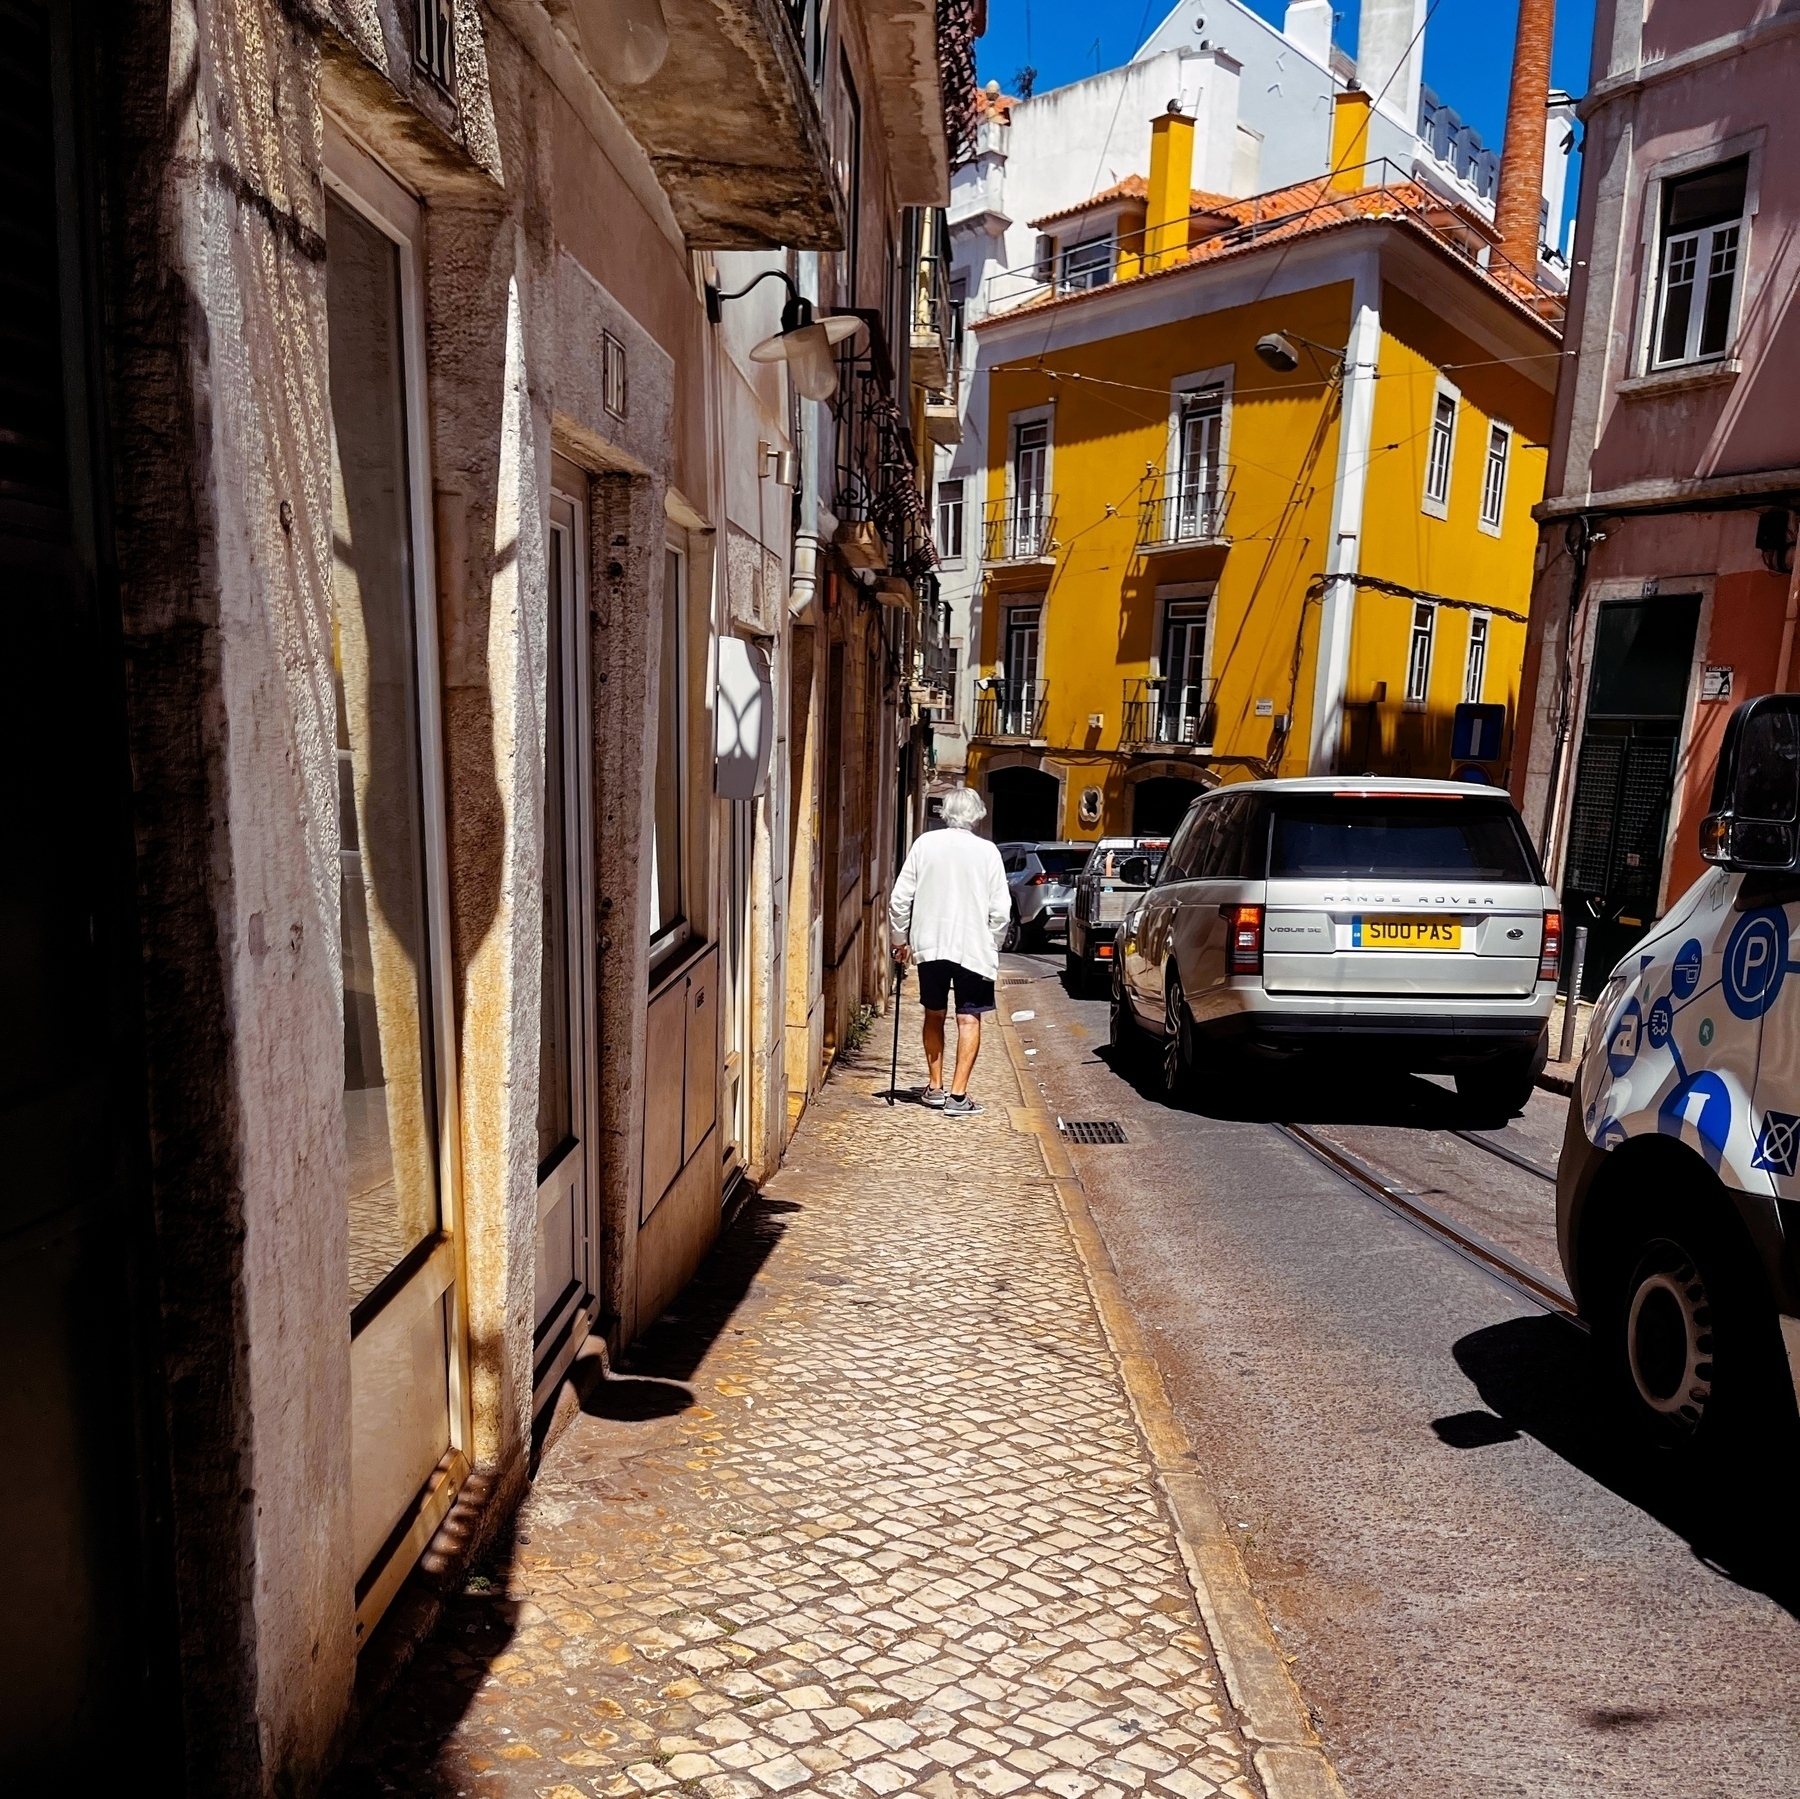 Old man wearing a white cardigan and black shorts, out for a walk in the narrow streets of Lisbon, steadying himself with a cane. Stationary traffic clogs the single lane road. 